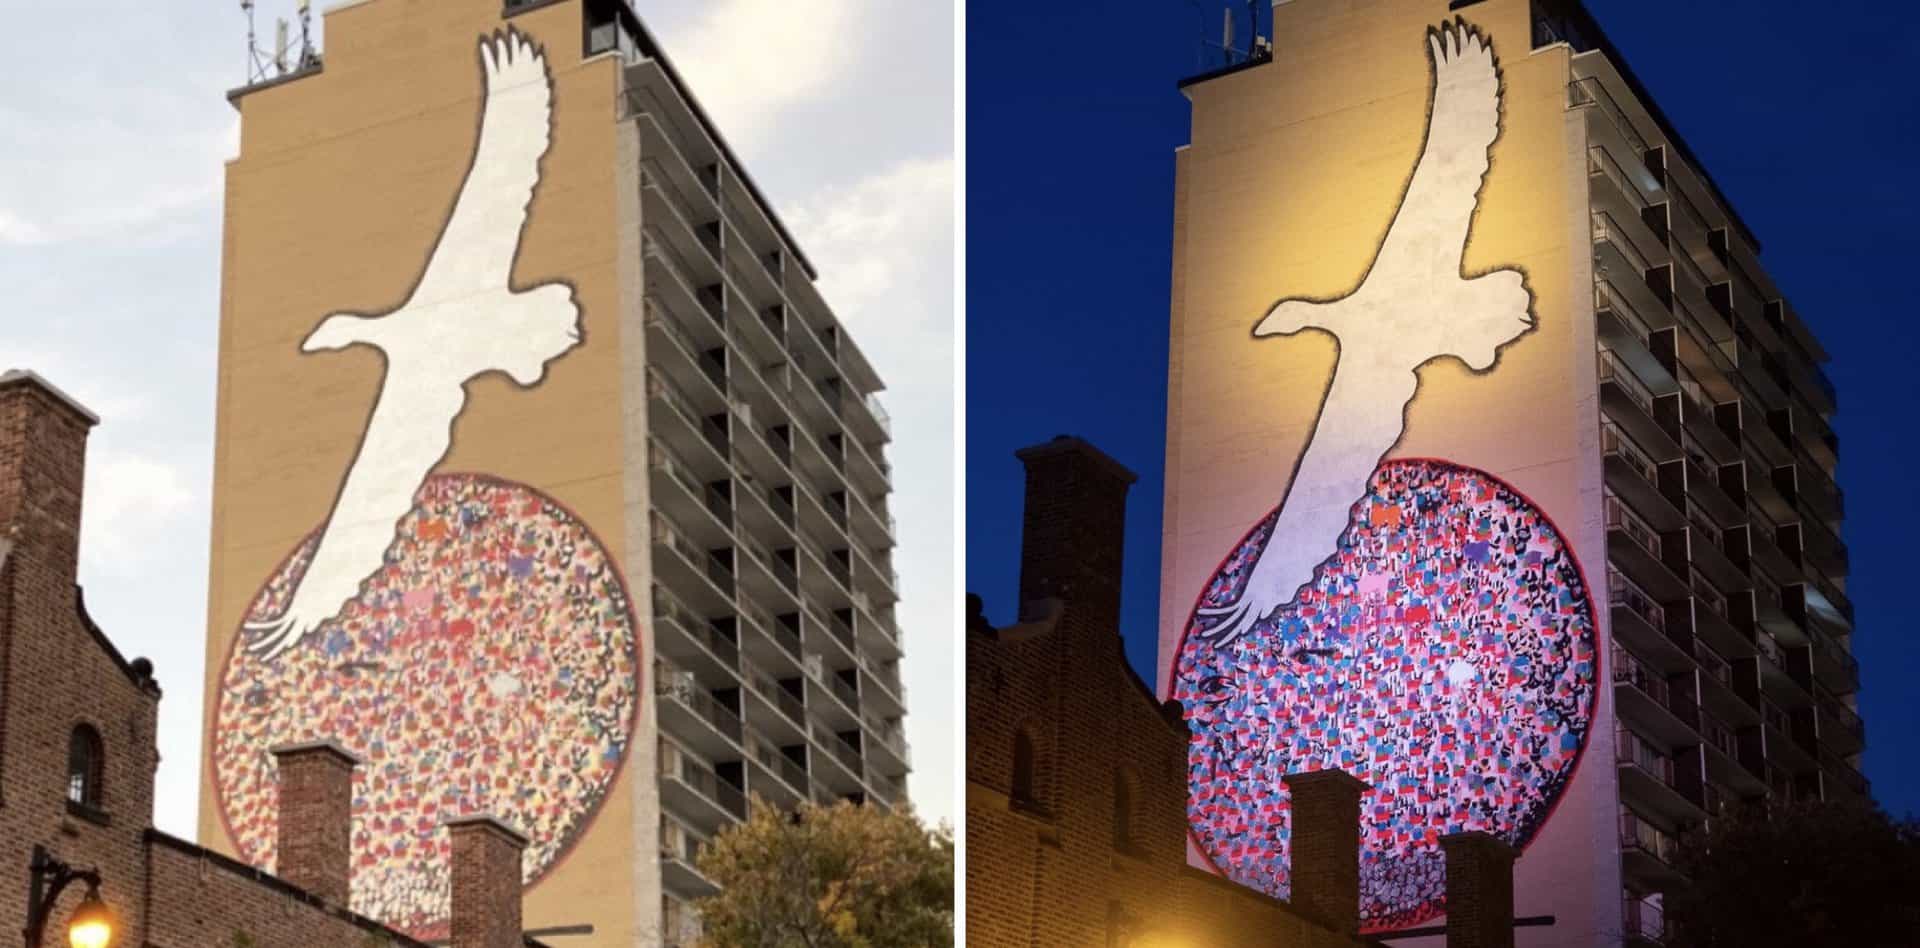 City of Montreal unveils illuminated Jean Paul Riopelle mural in the McGill Ghetto